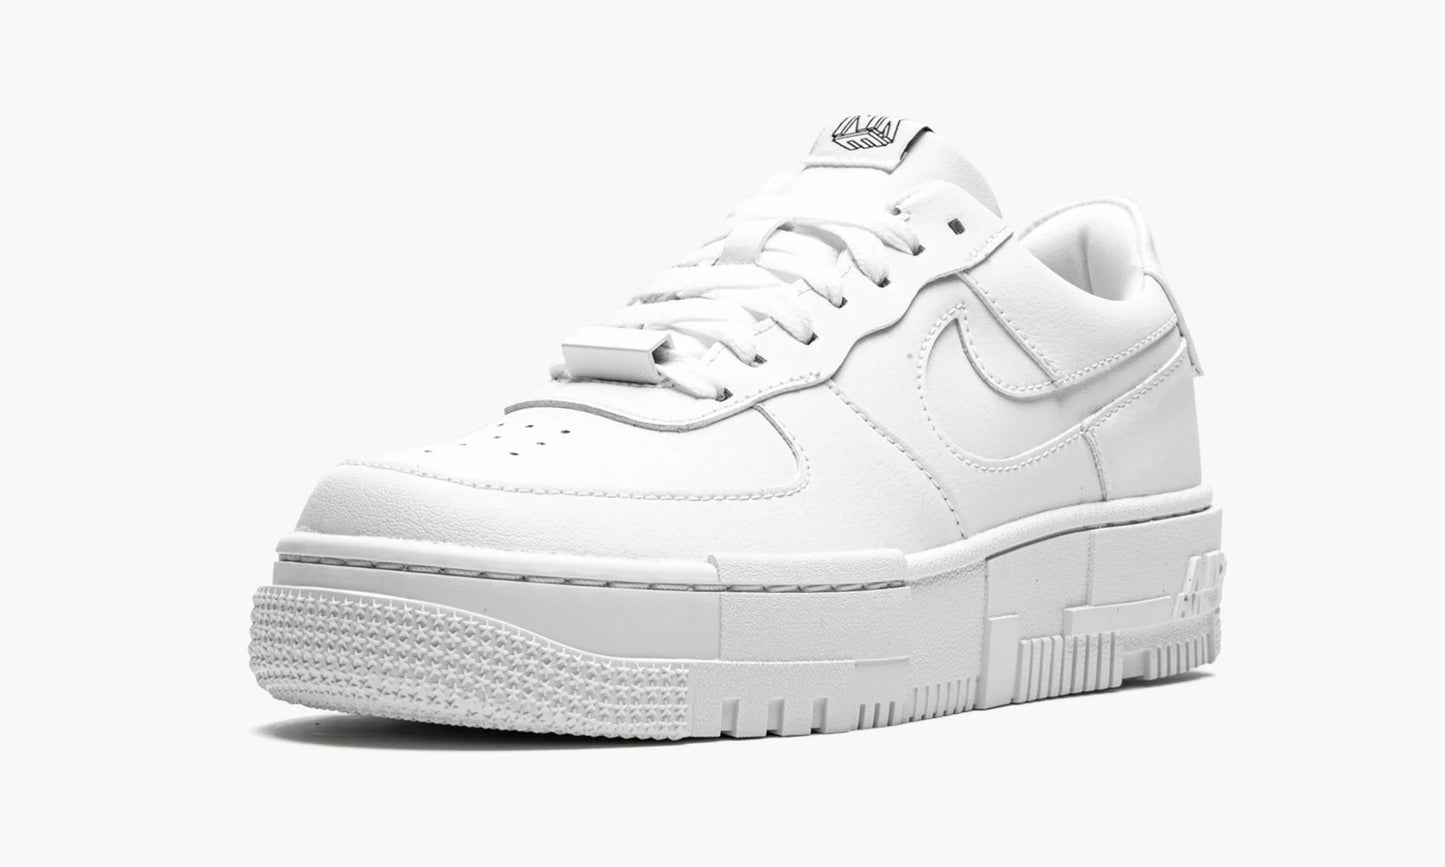 Air Force 1 Low Pixel WMNS White - CK6649 100 | The Sortage